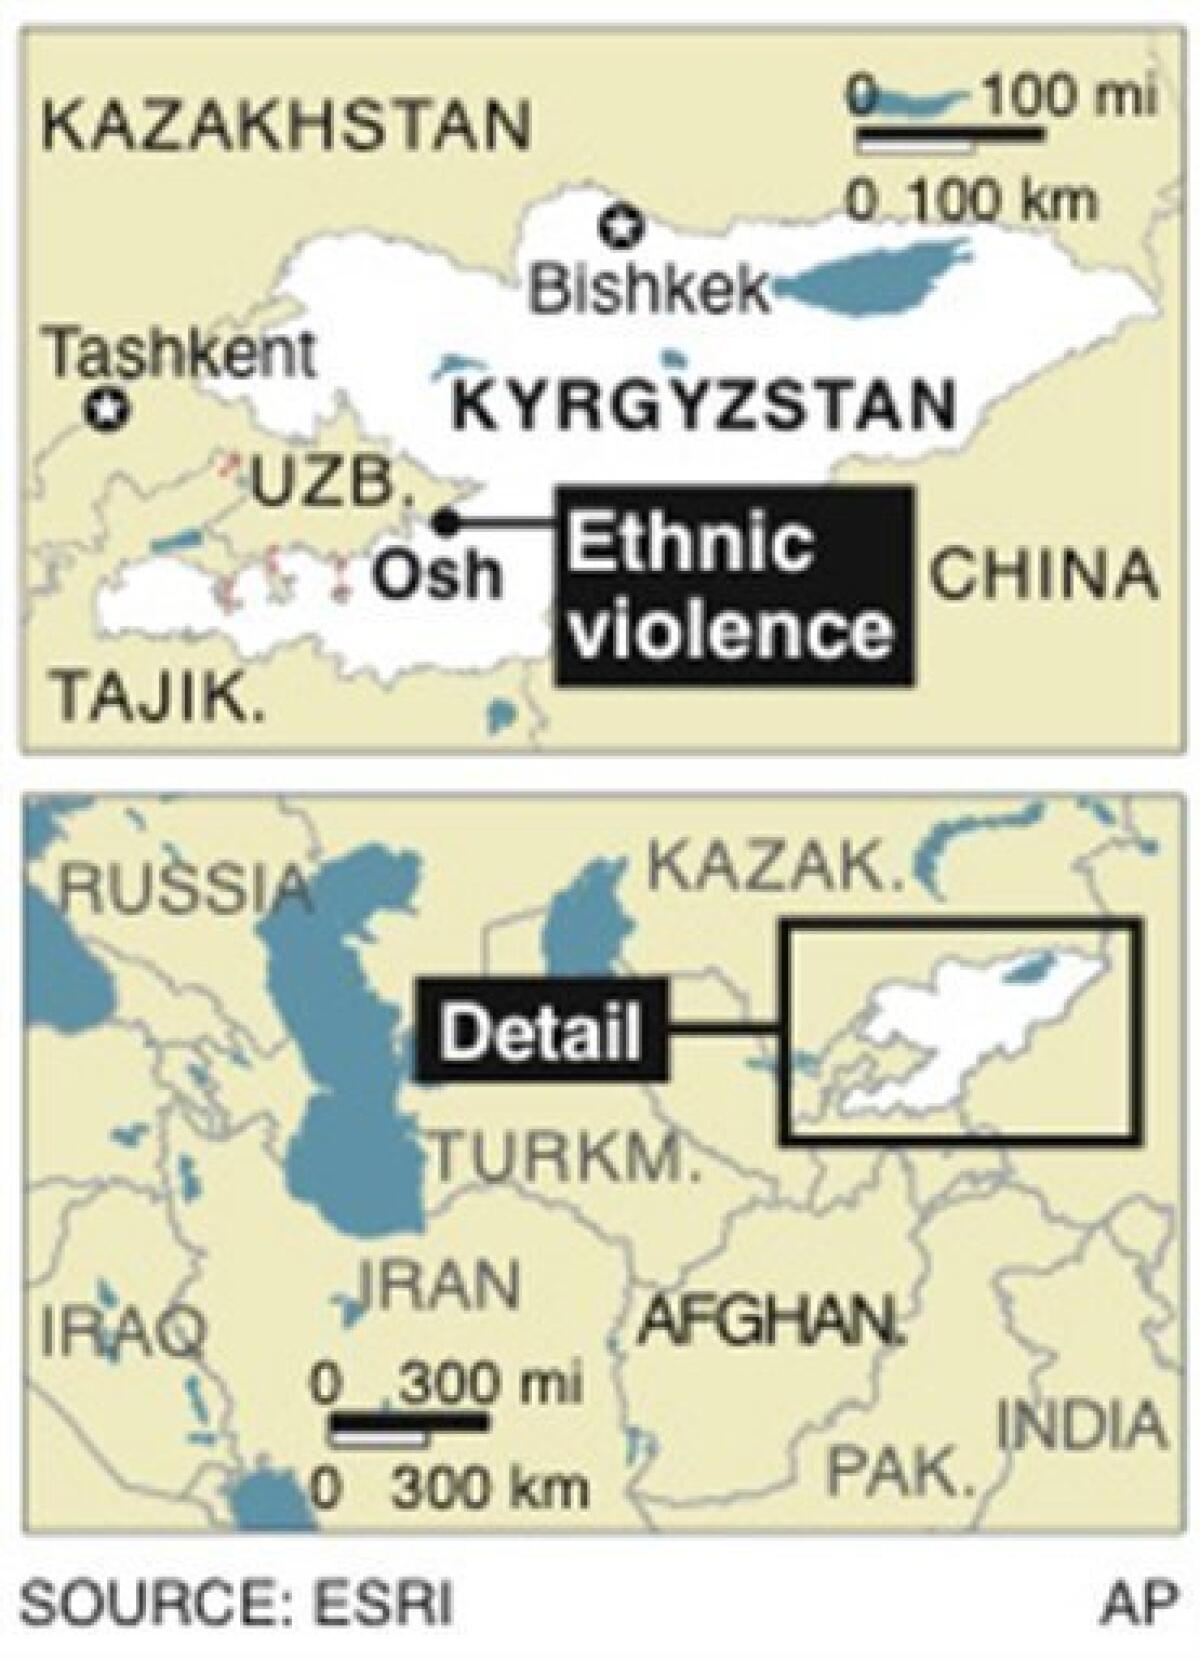 Map locates Osh in Kyrgyzstan where ethnic violence has broken out